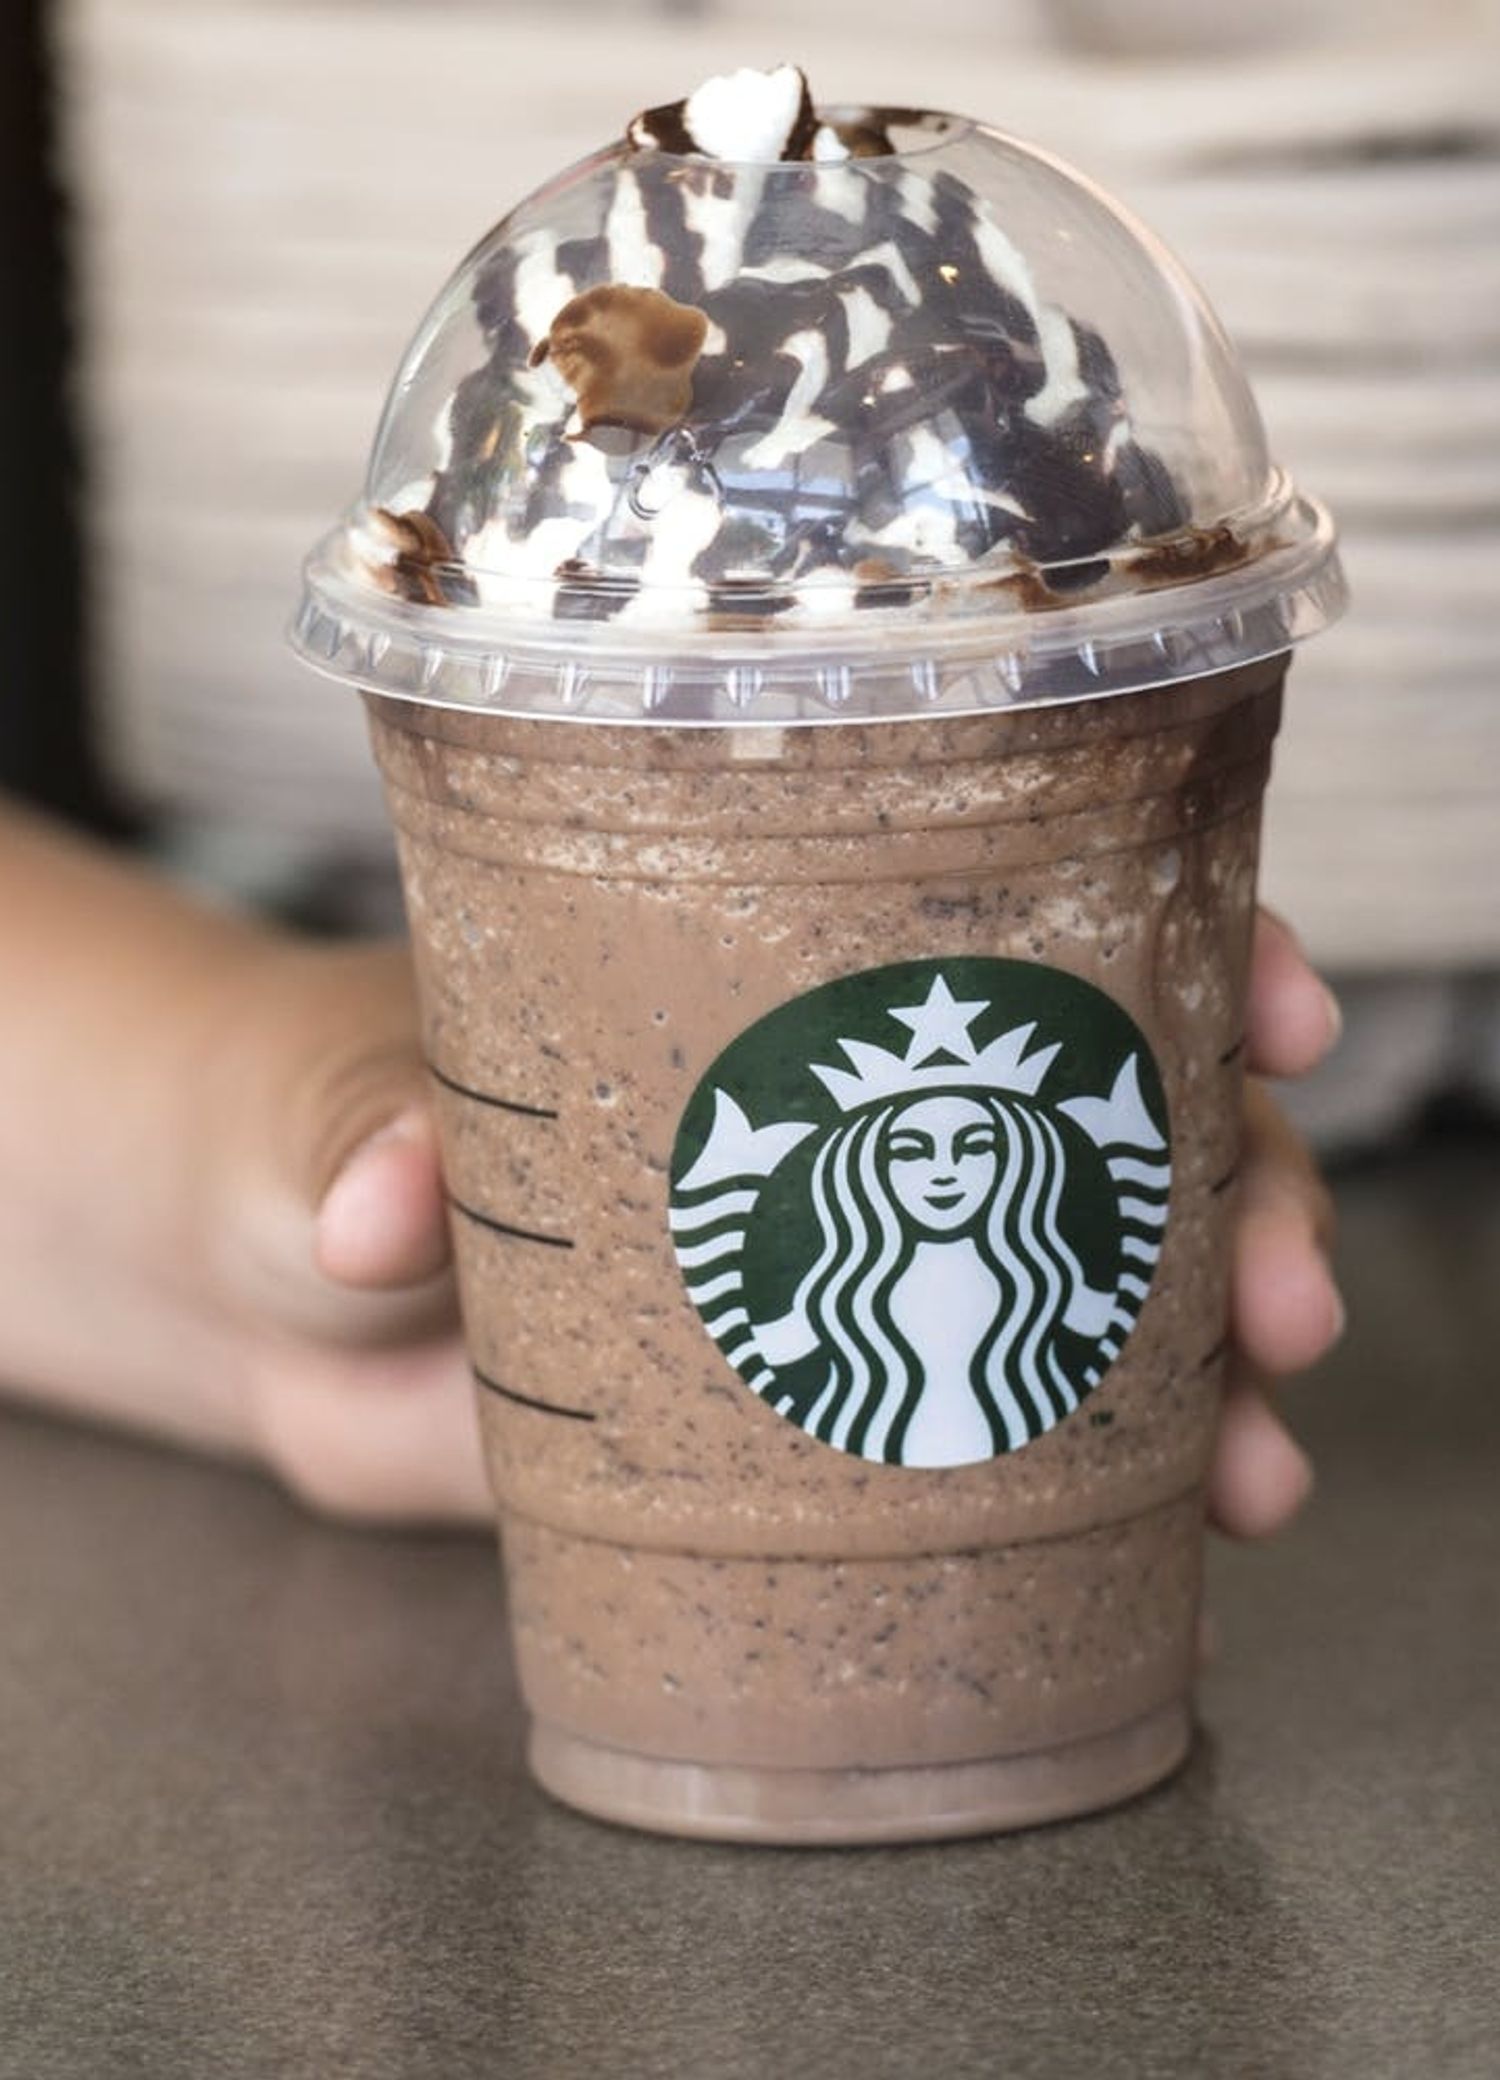 Your Favorite Starbucks Drink Might Contain 25 Spoonfuls of Sugar